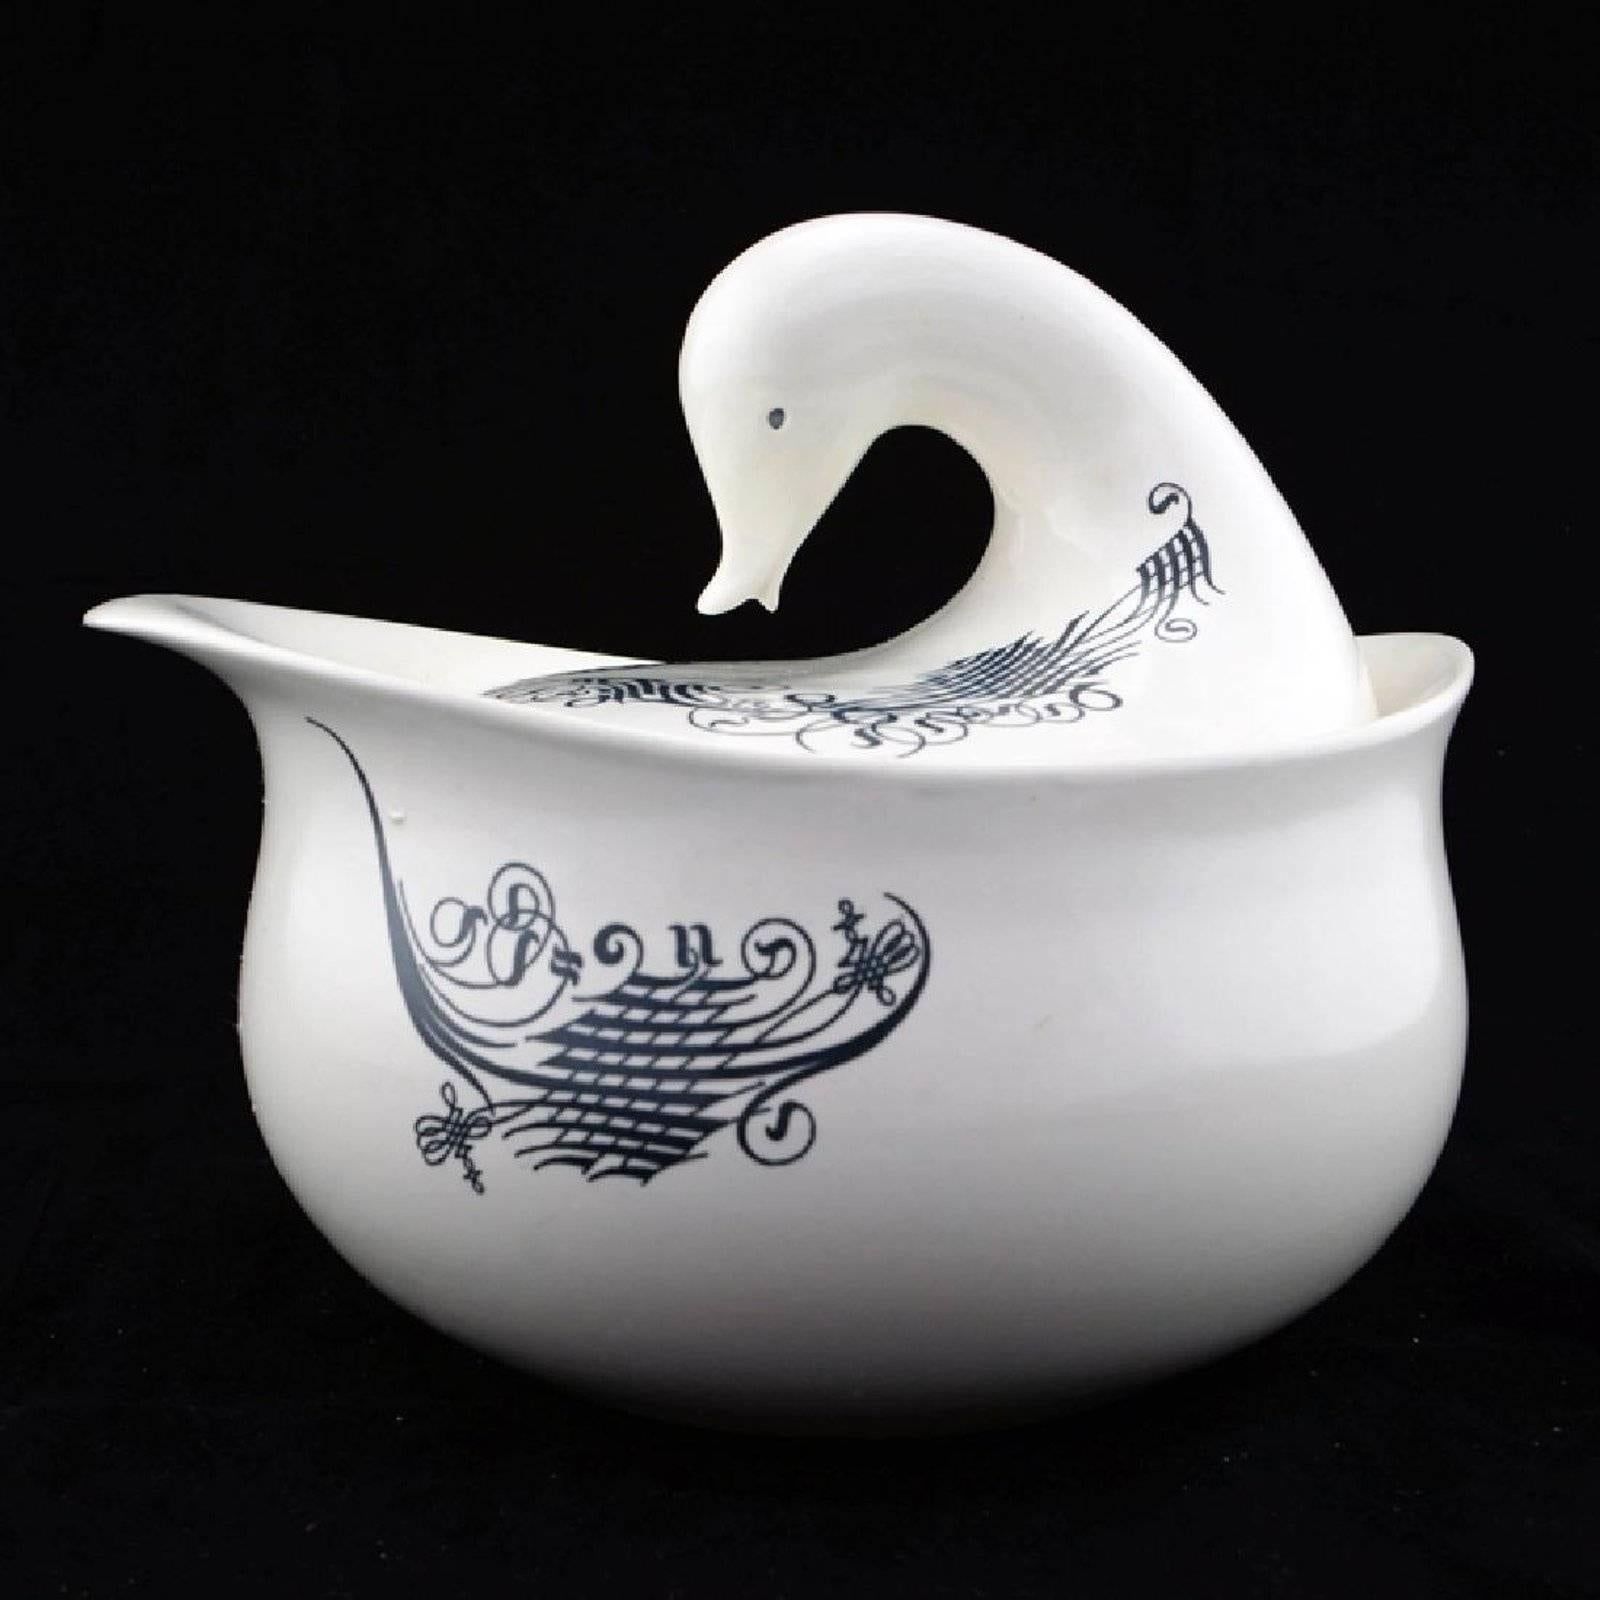 A large midcentury covered serving bowl or casserole designed by Eva Zeisel (1906-2011) for Schmid International in the 'Lyric' pattern featuring an abstract black linear pattern against a warm white ground. The whimsical bird-shaped duck or goose